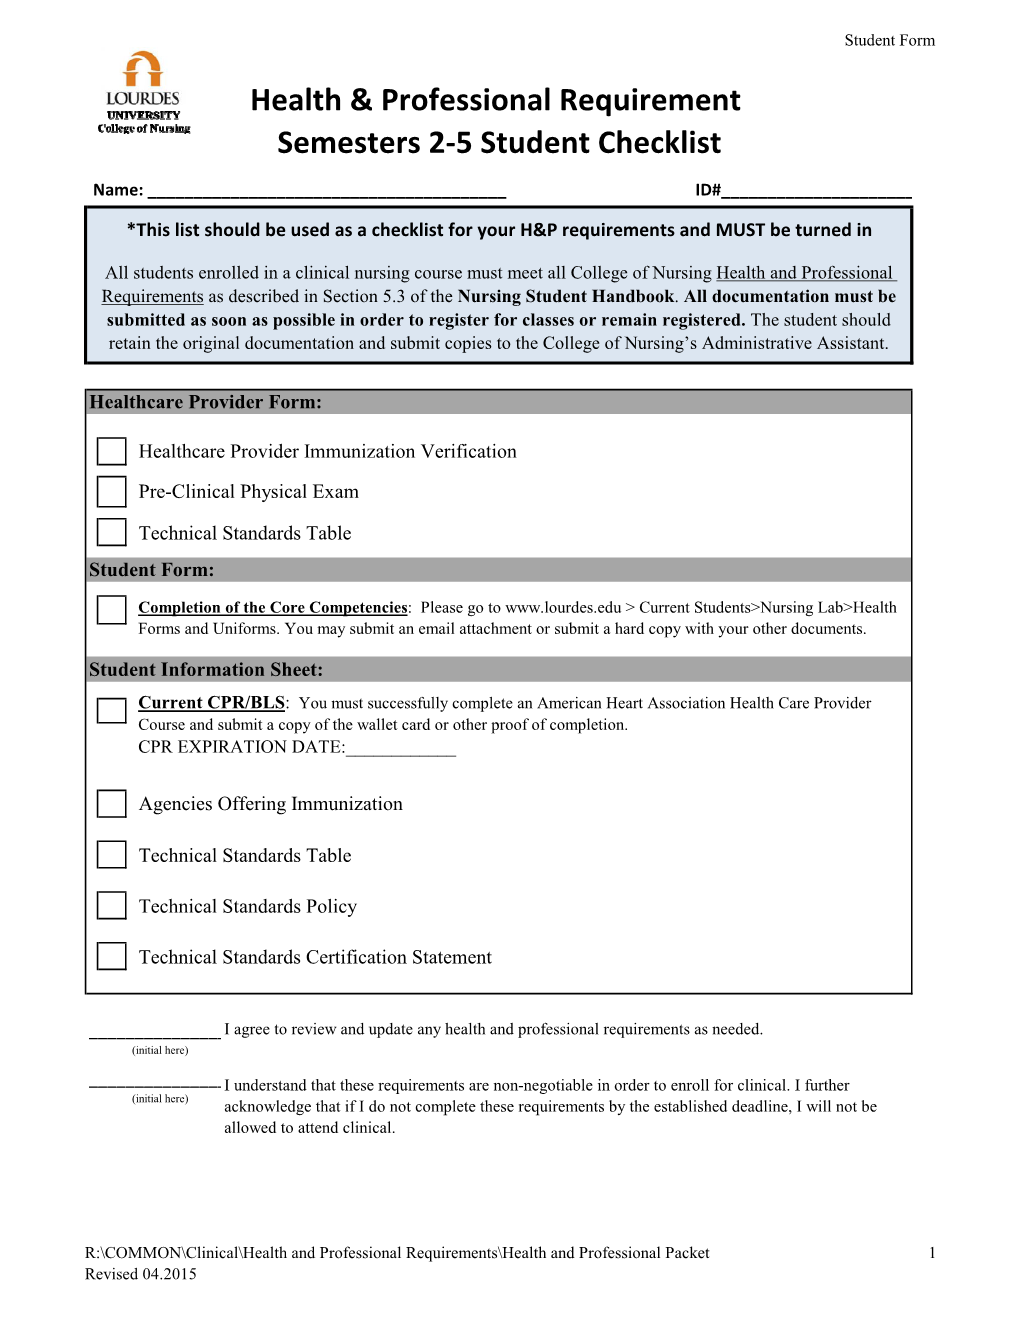 Health & Professional Requirement Semesters 2-5 Student Checklist